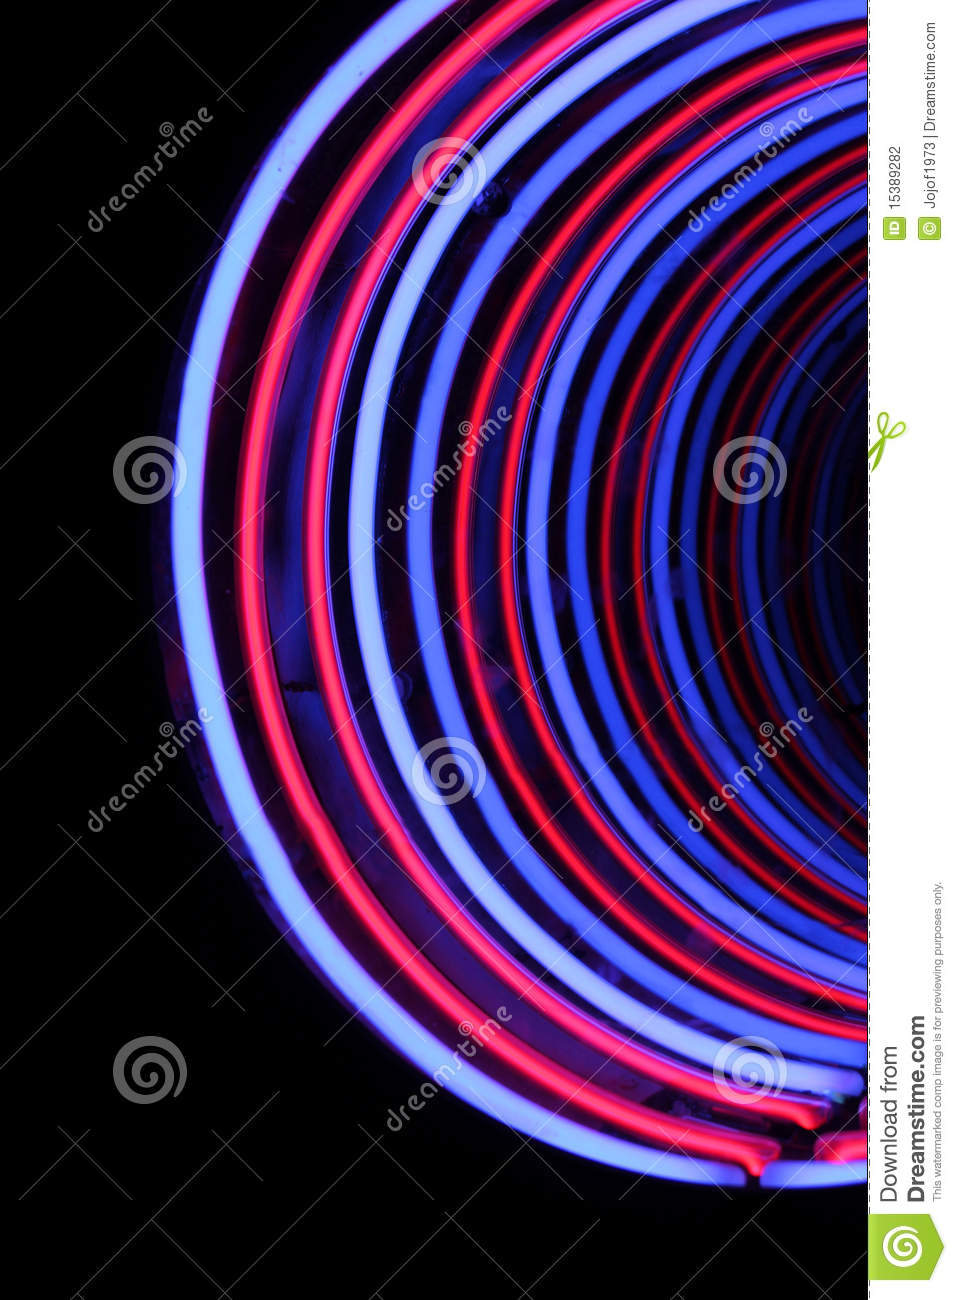 Neon Tube Abstract Shape Background Stock Photography   Image    